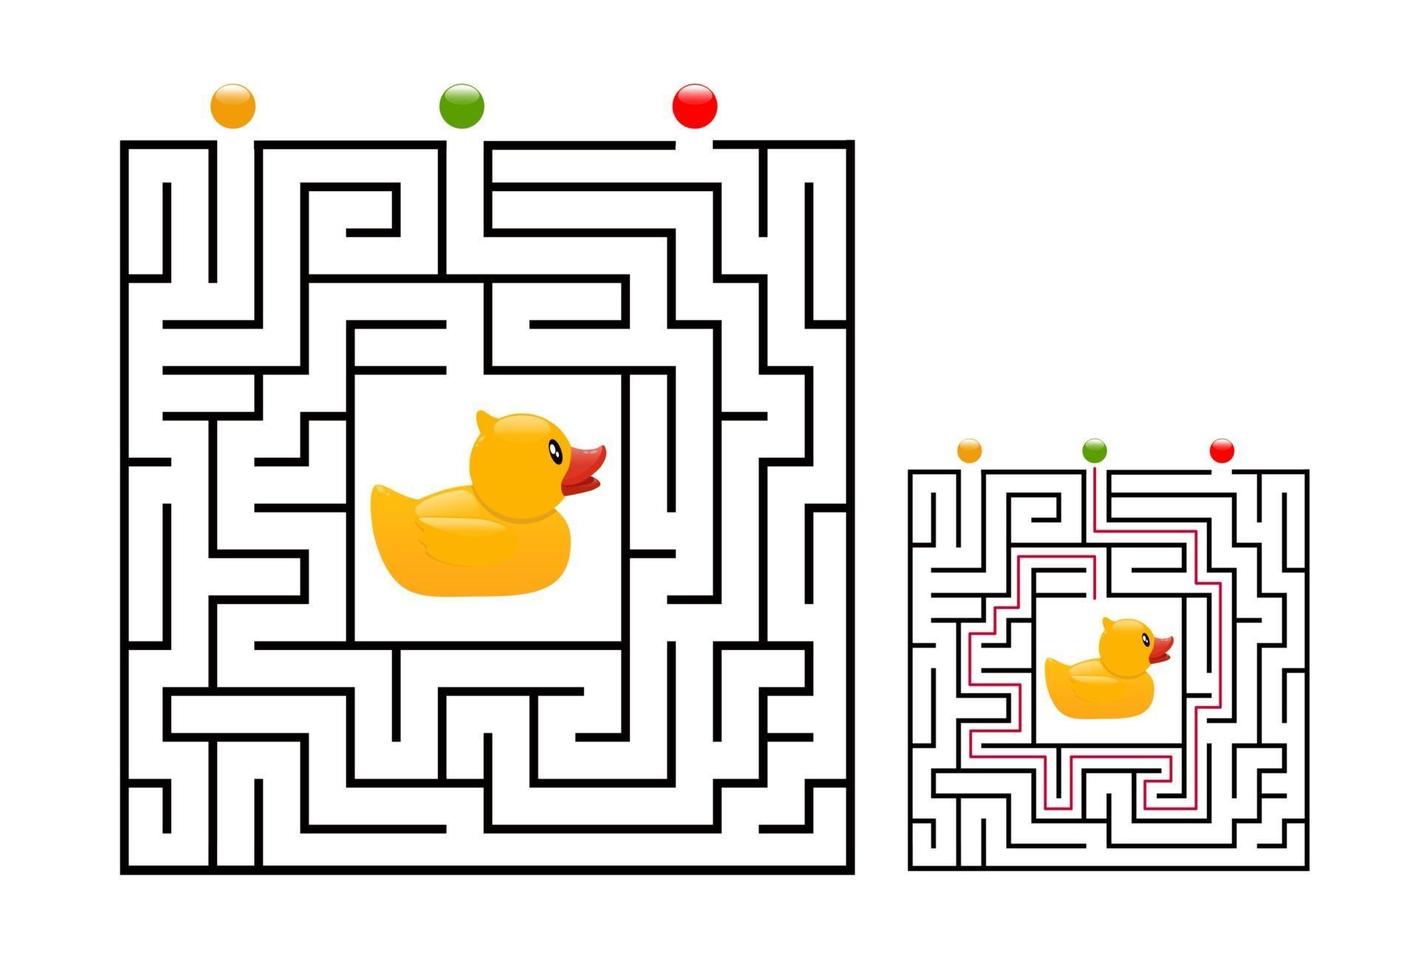 Square maze labyrinth game for kids with rubber duck. Labyrinth logic vector